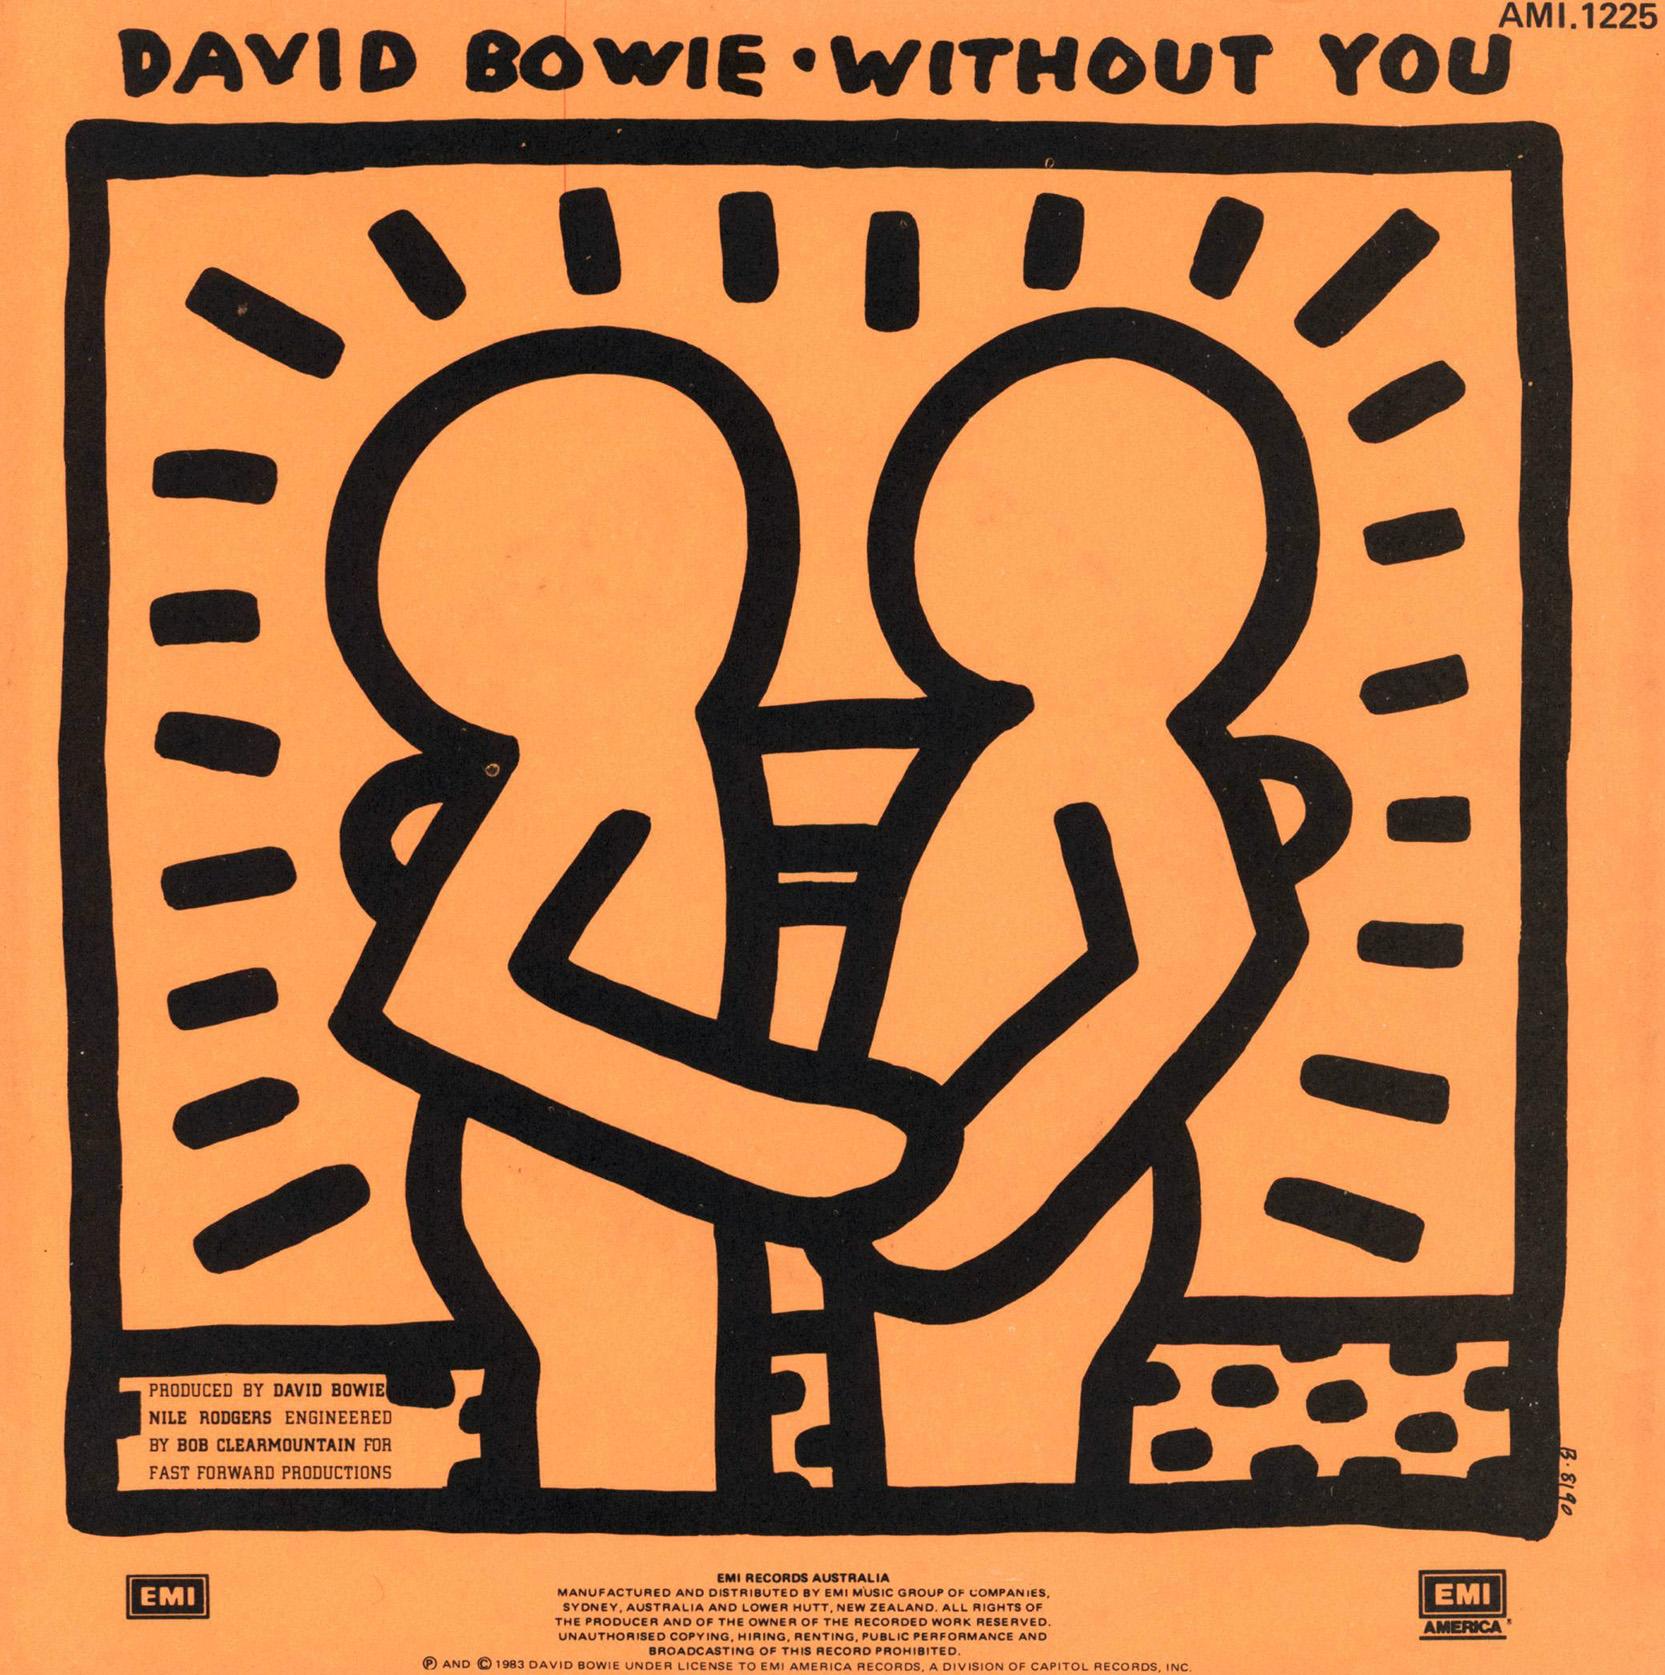 David BOWIE "Without You" A Highly Sought After Vinyl Art Cover featuring Artwork by Keith Haring:

Year: 1983.

Medium: Off-Set Lithograph on 7" vinyl album cover.

Dimensions: 7 x 7 inches

Cover: Some minor rub wear; in otherwise very good